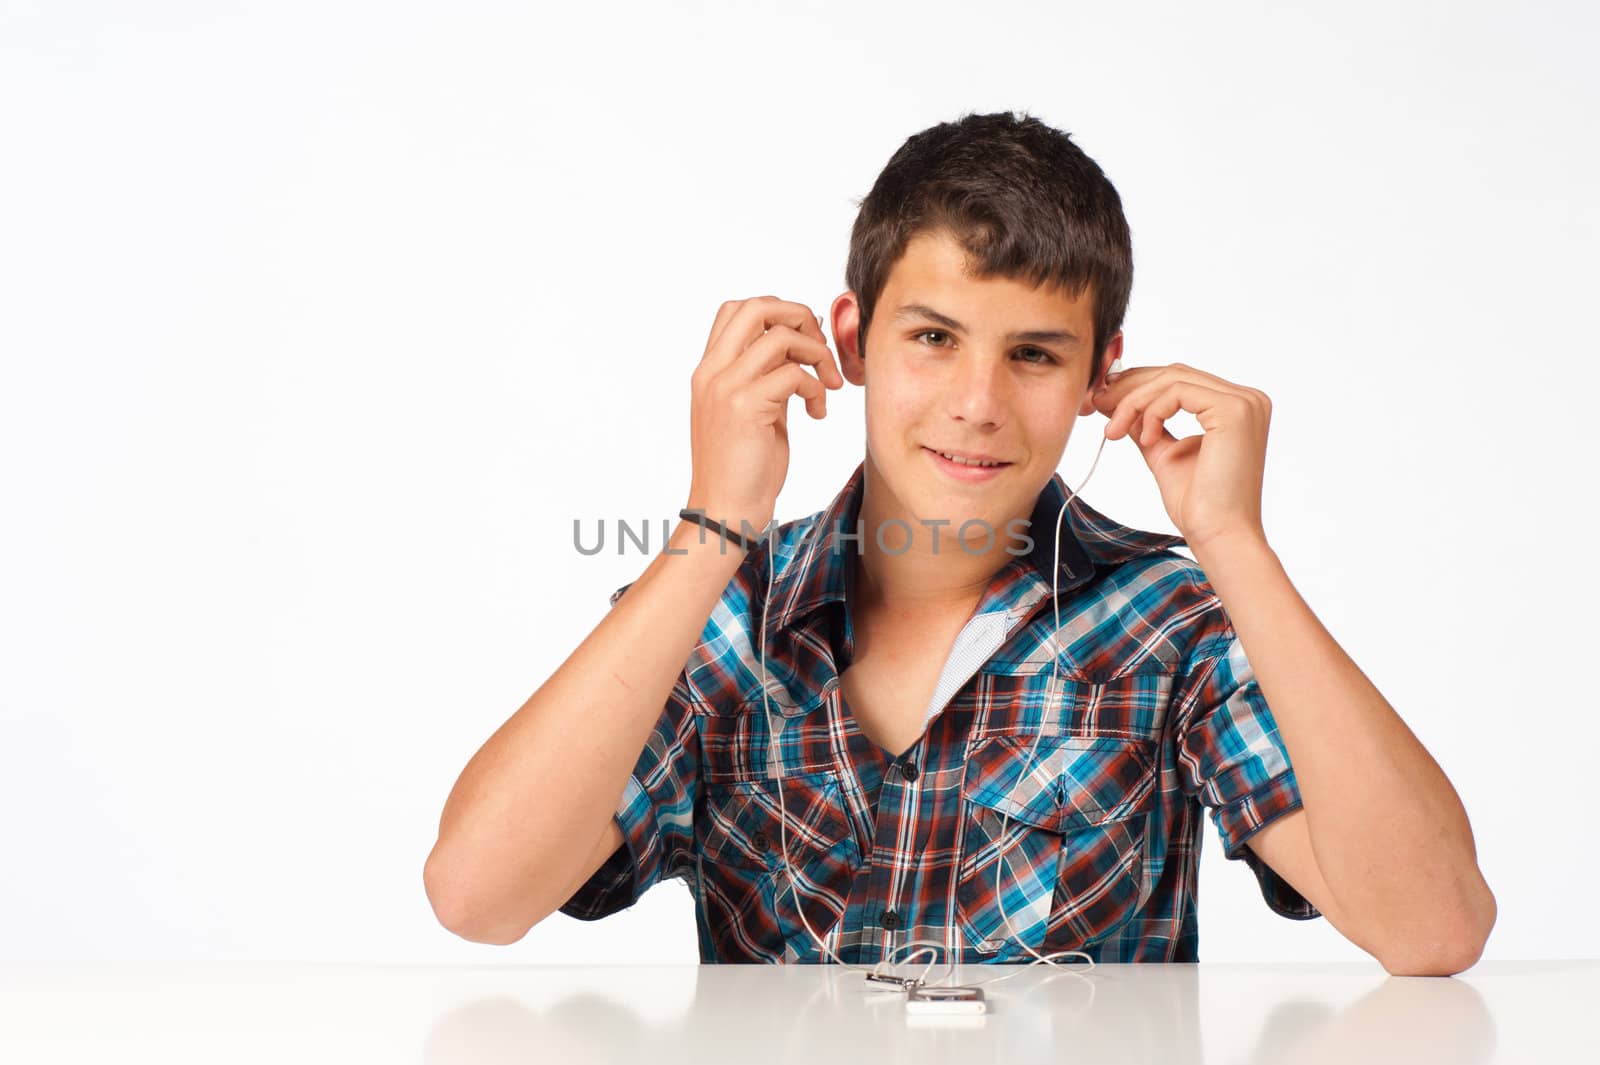 Teen enjoying his MP3 player, isolated on white